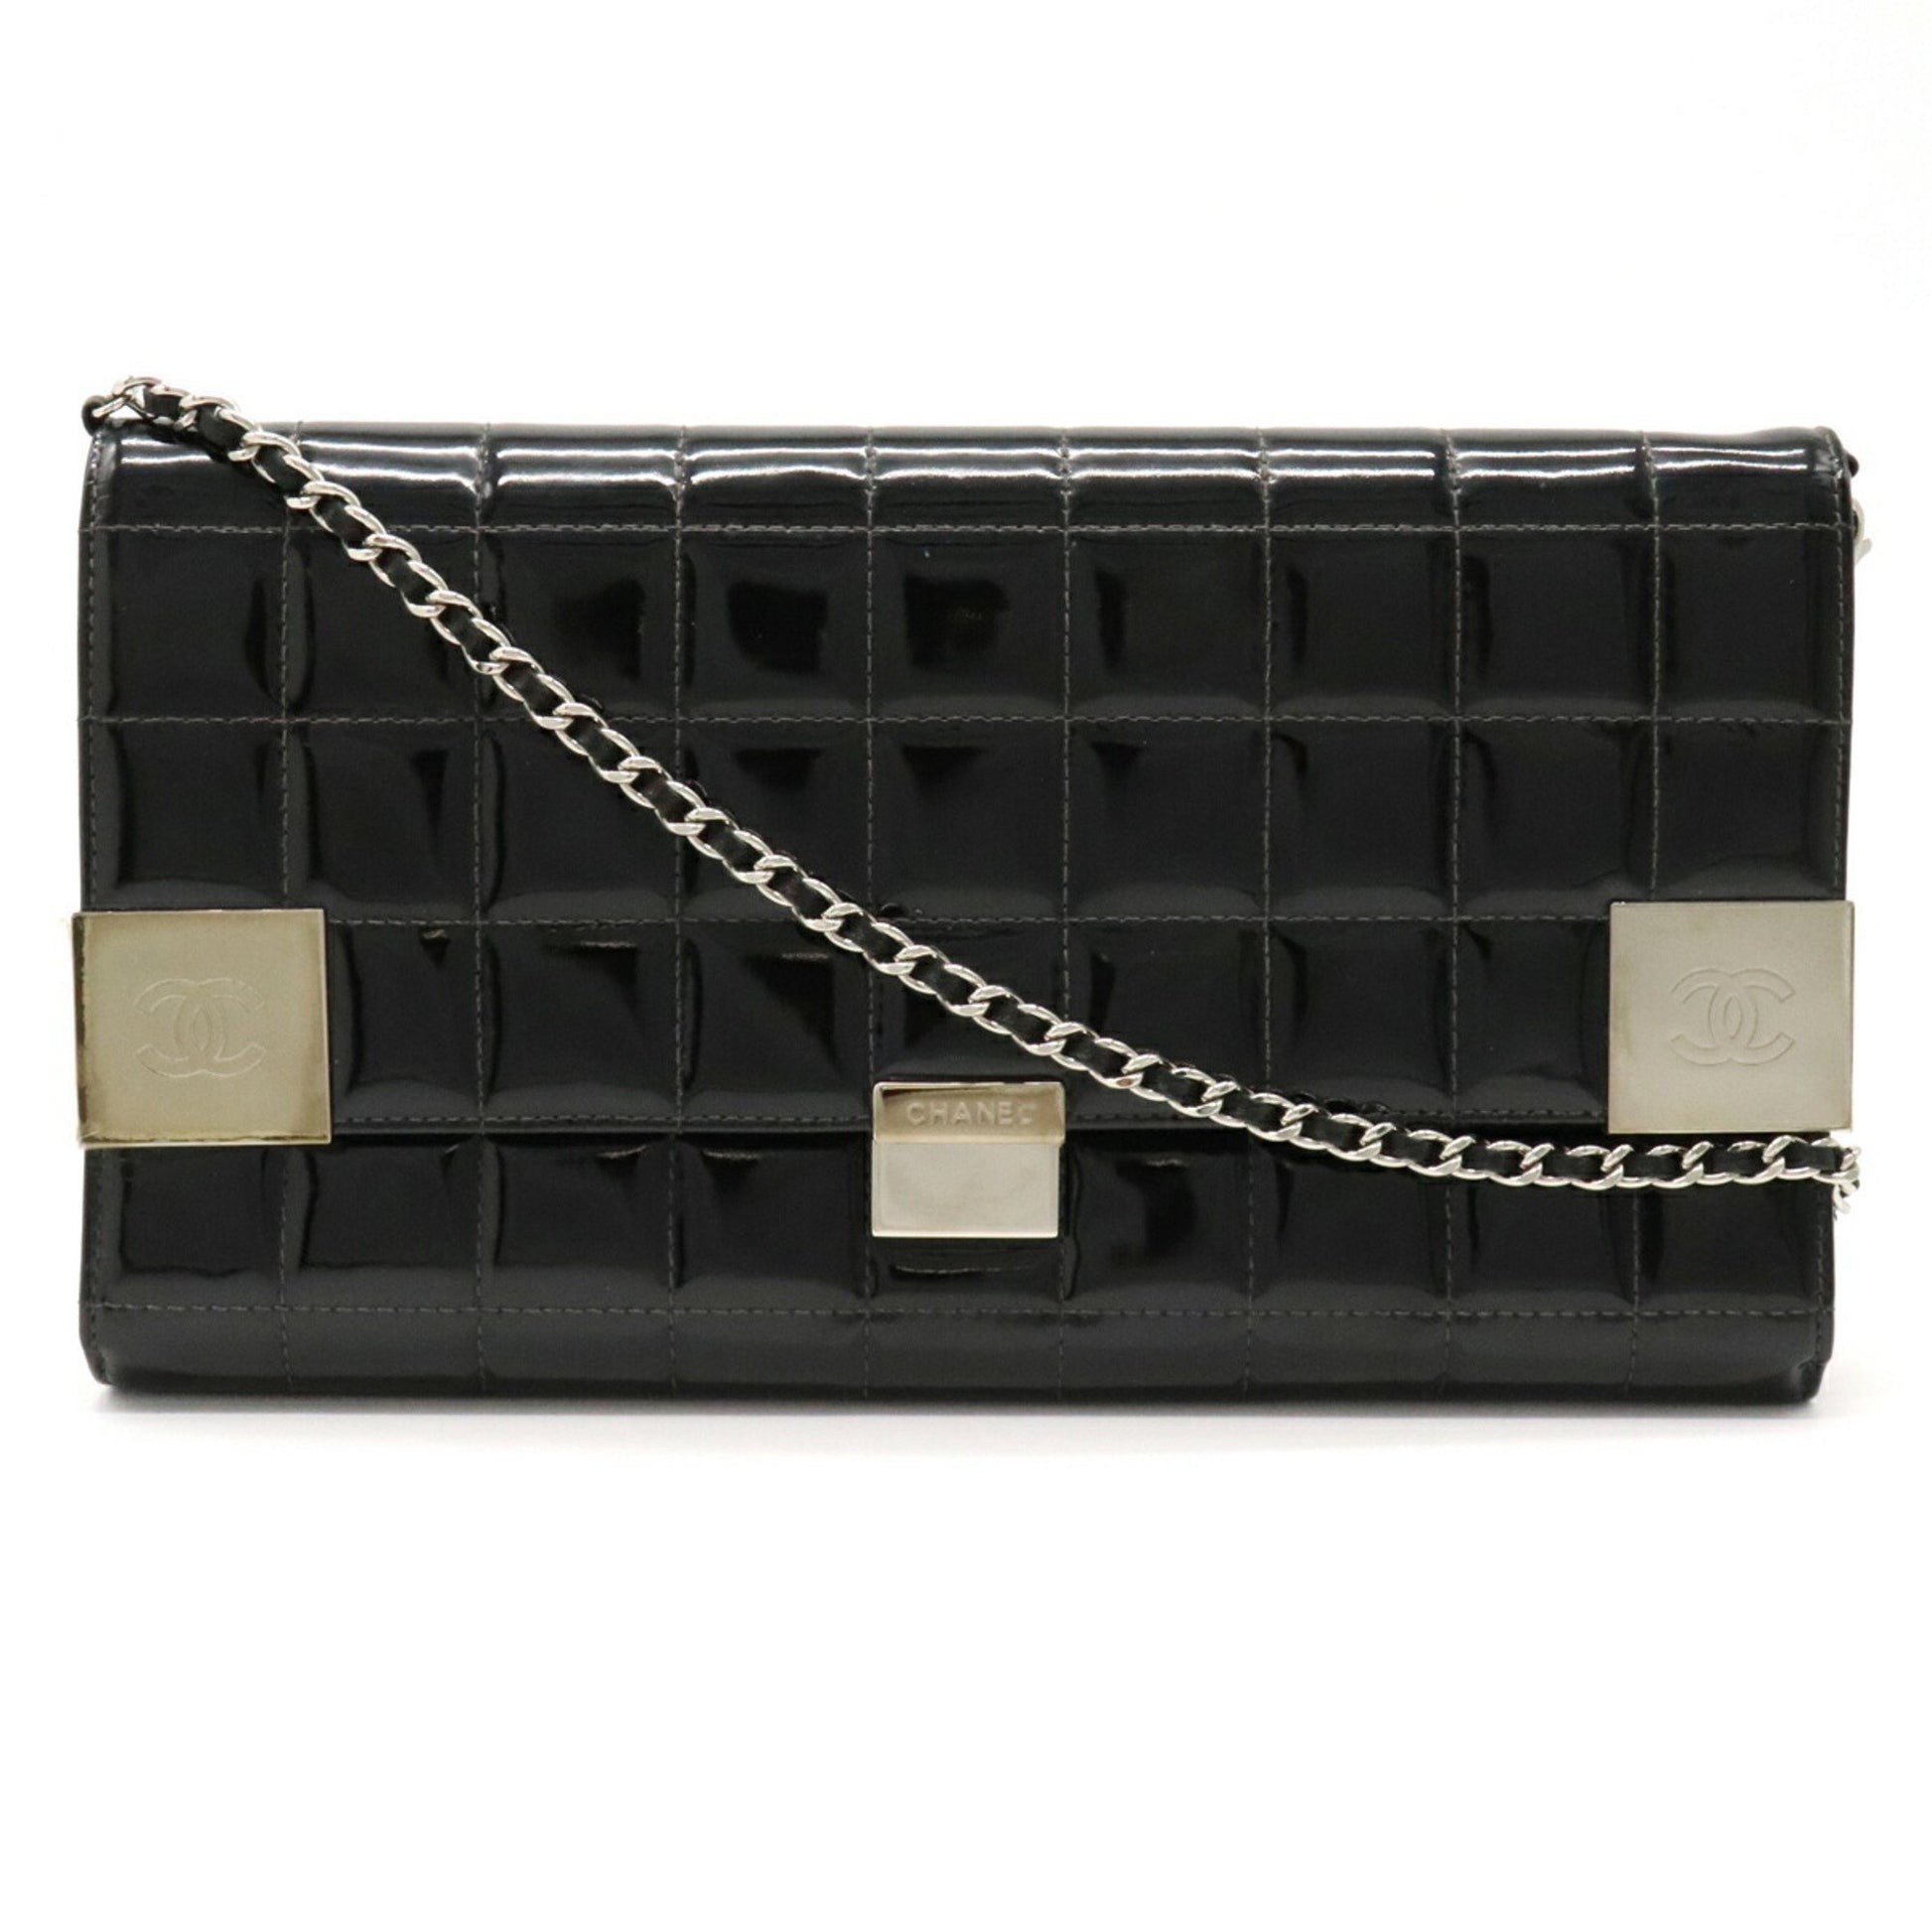 Chanel chocolate bar here mark chain bag enamel patent leather black